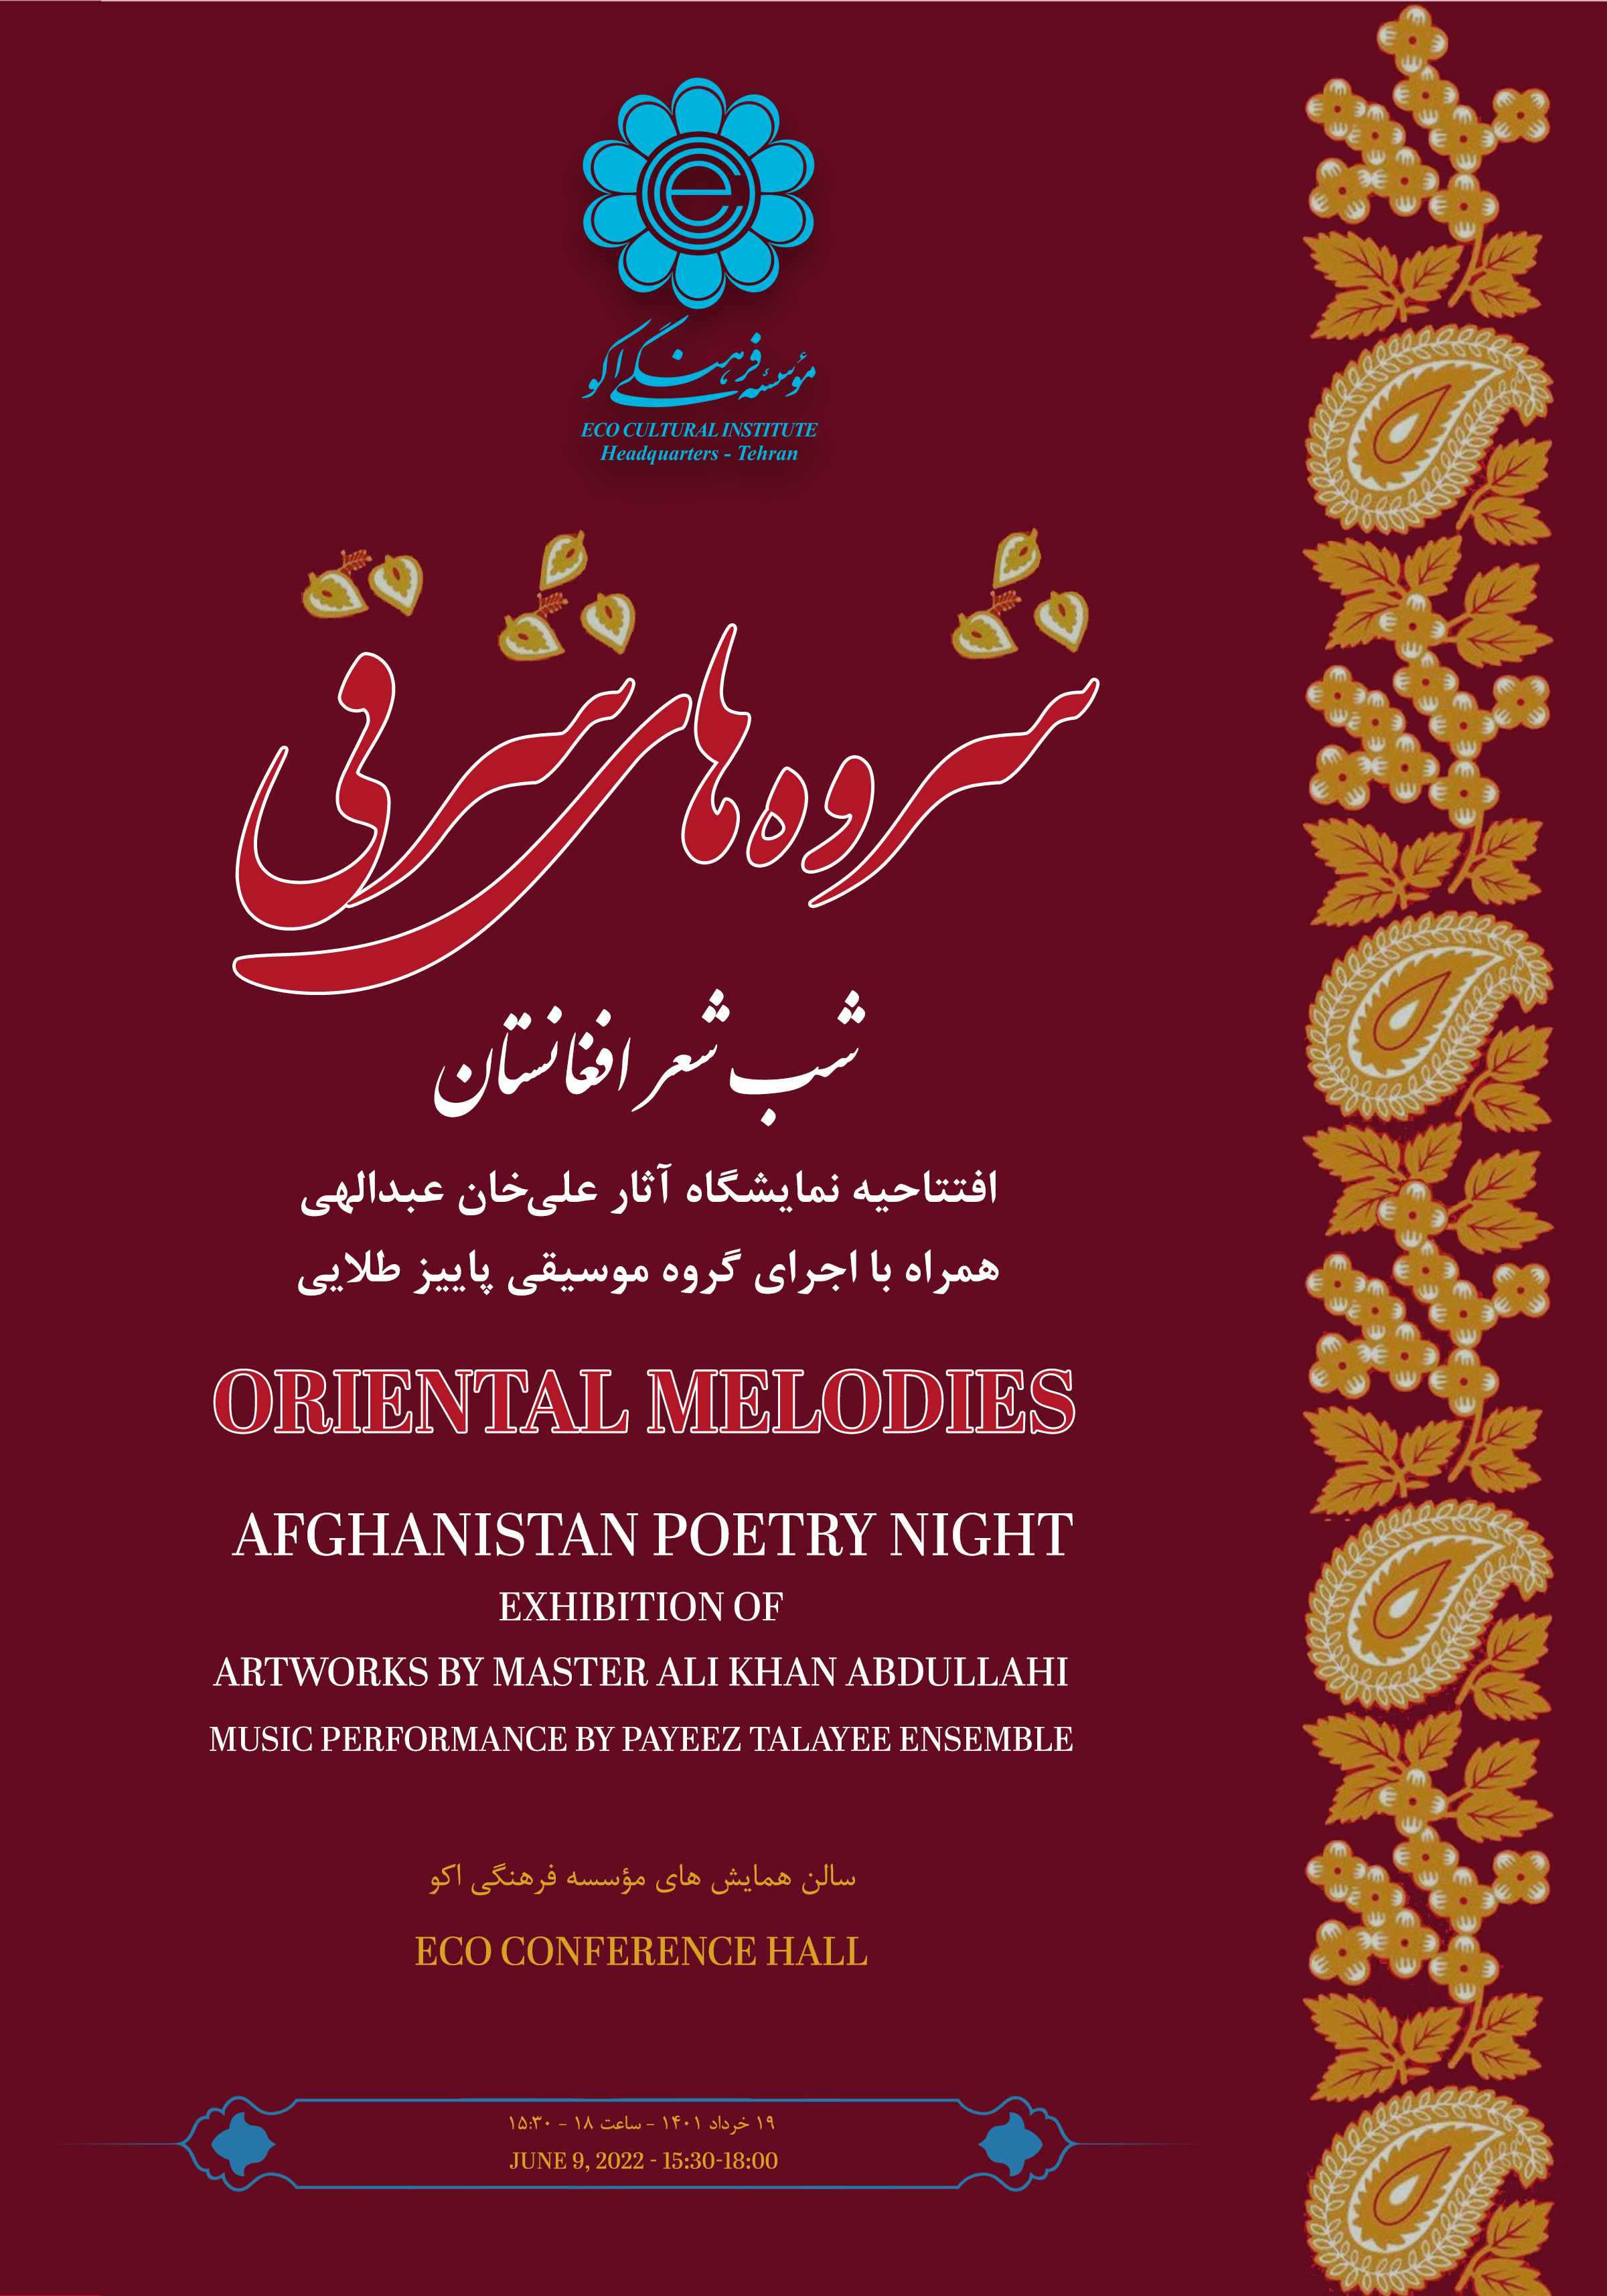 "Oriental Melody" the Afghan Poetry Night